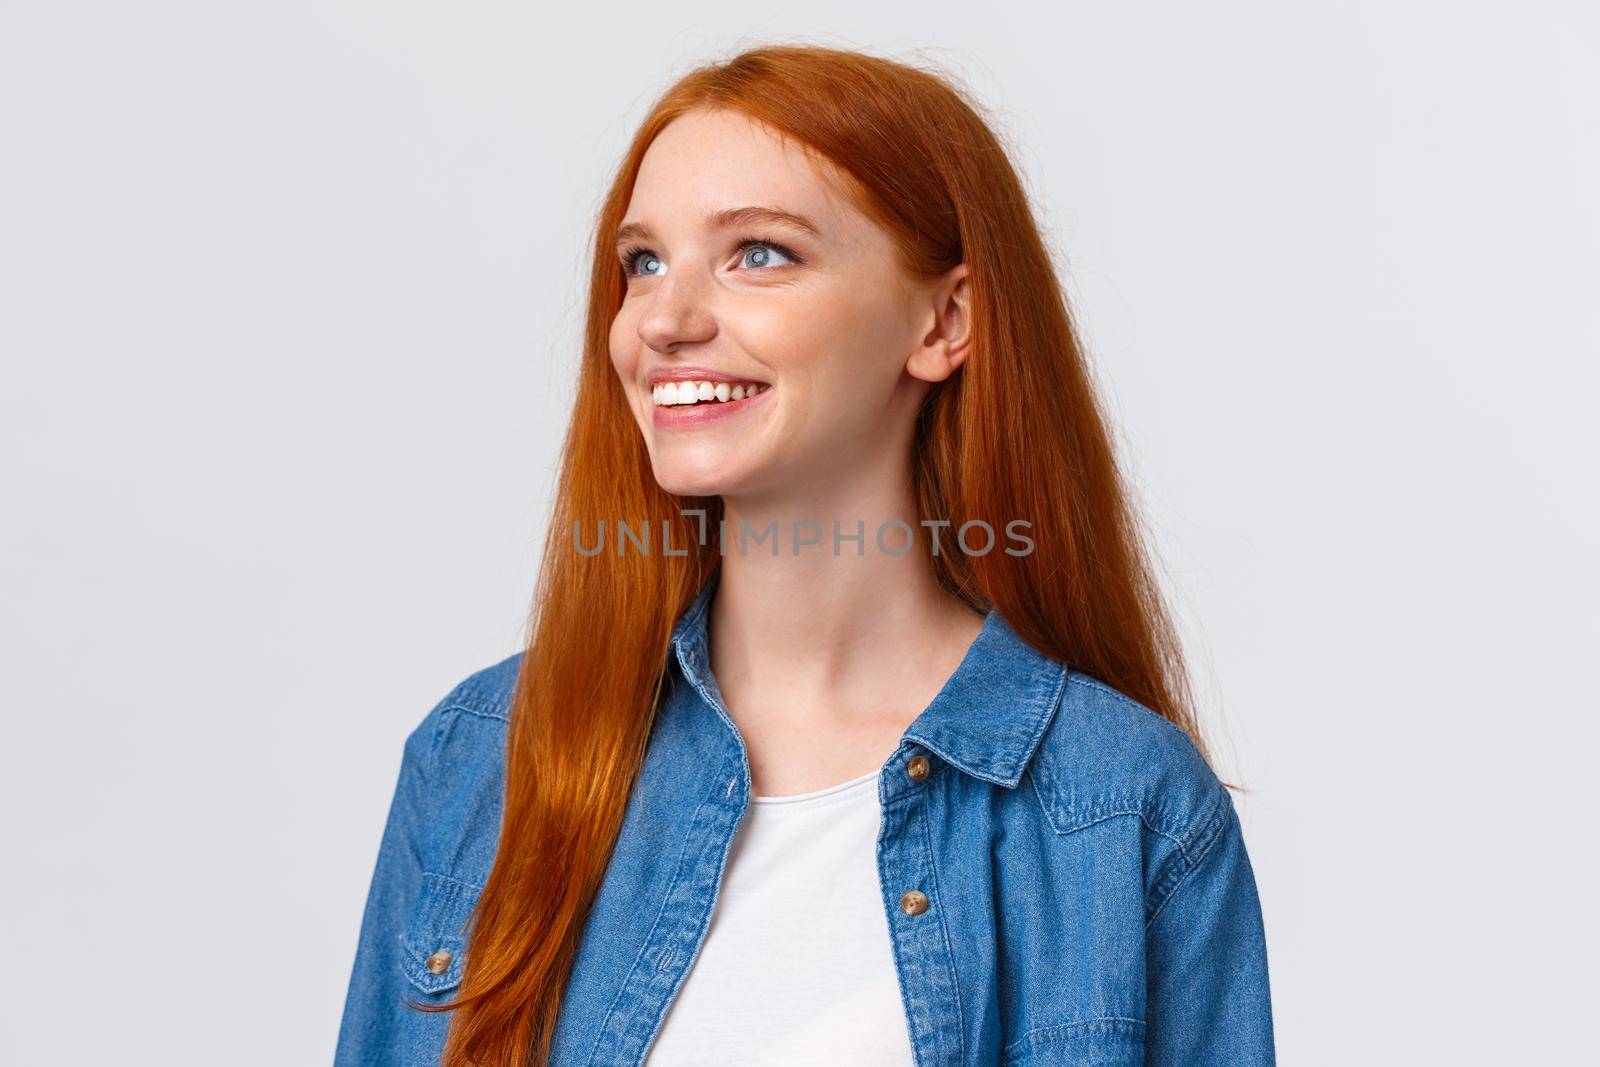 Close-up portrait dreamy and cute upbeat redhead woman seeing beautiful view, contemplate something wonderful, smiling and looking upper left corner delighted, white background.